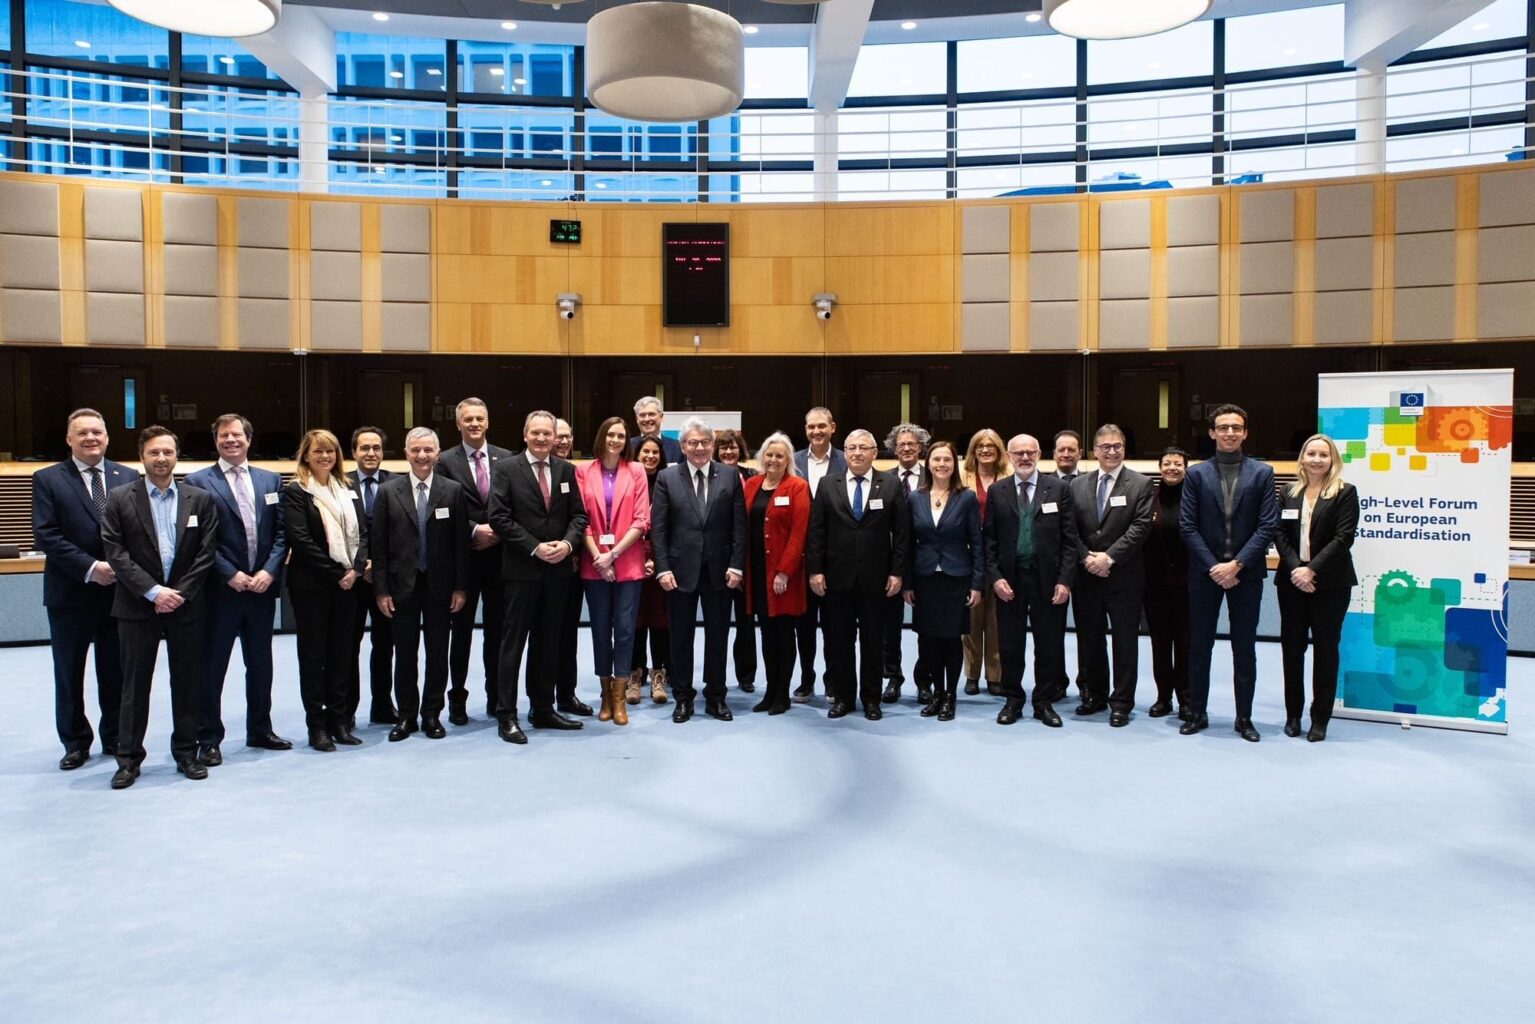 Key Takeaways from the Kick-off Meeting of the High Level Forum on European Standardisation